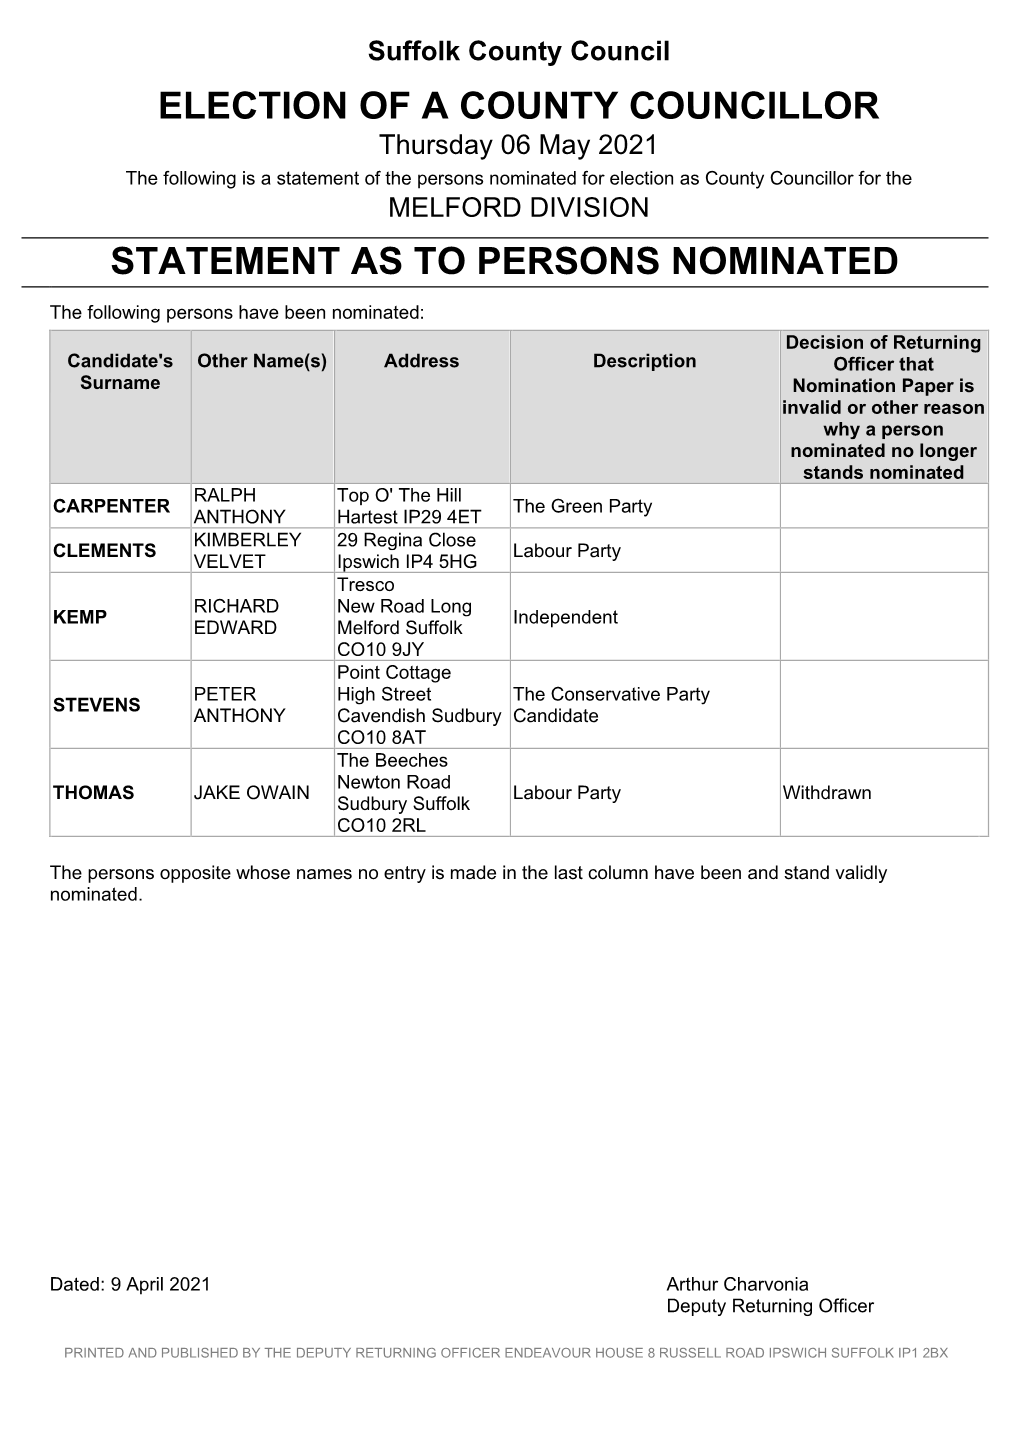 Election of a County Councillor Statement As to Persons Nominated